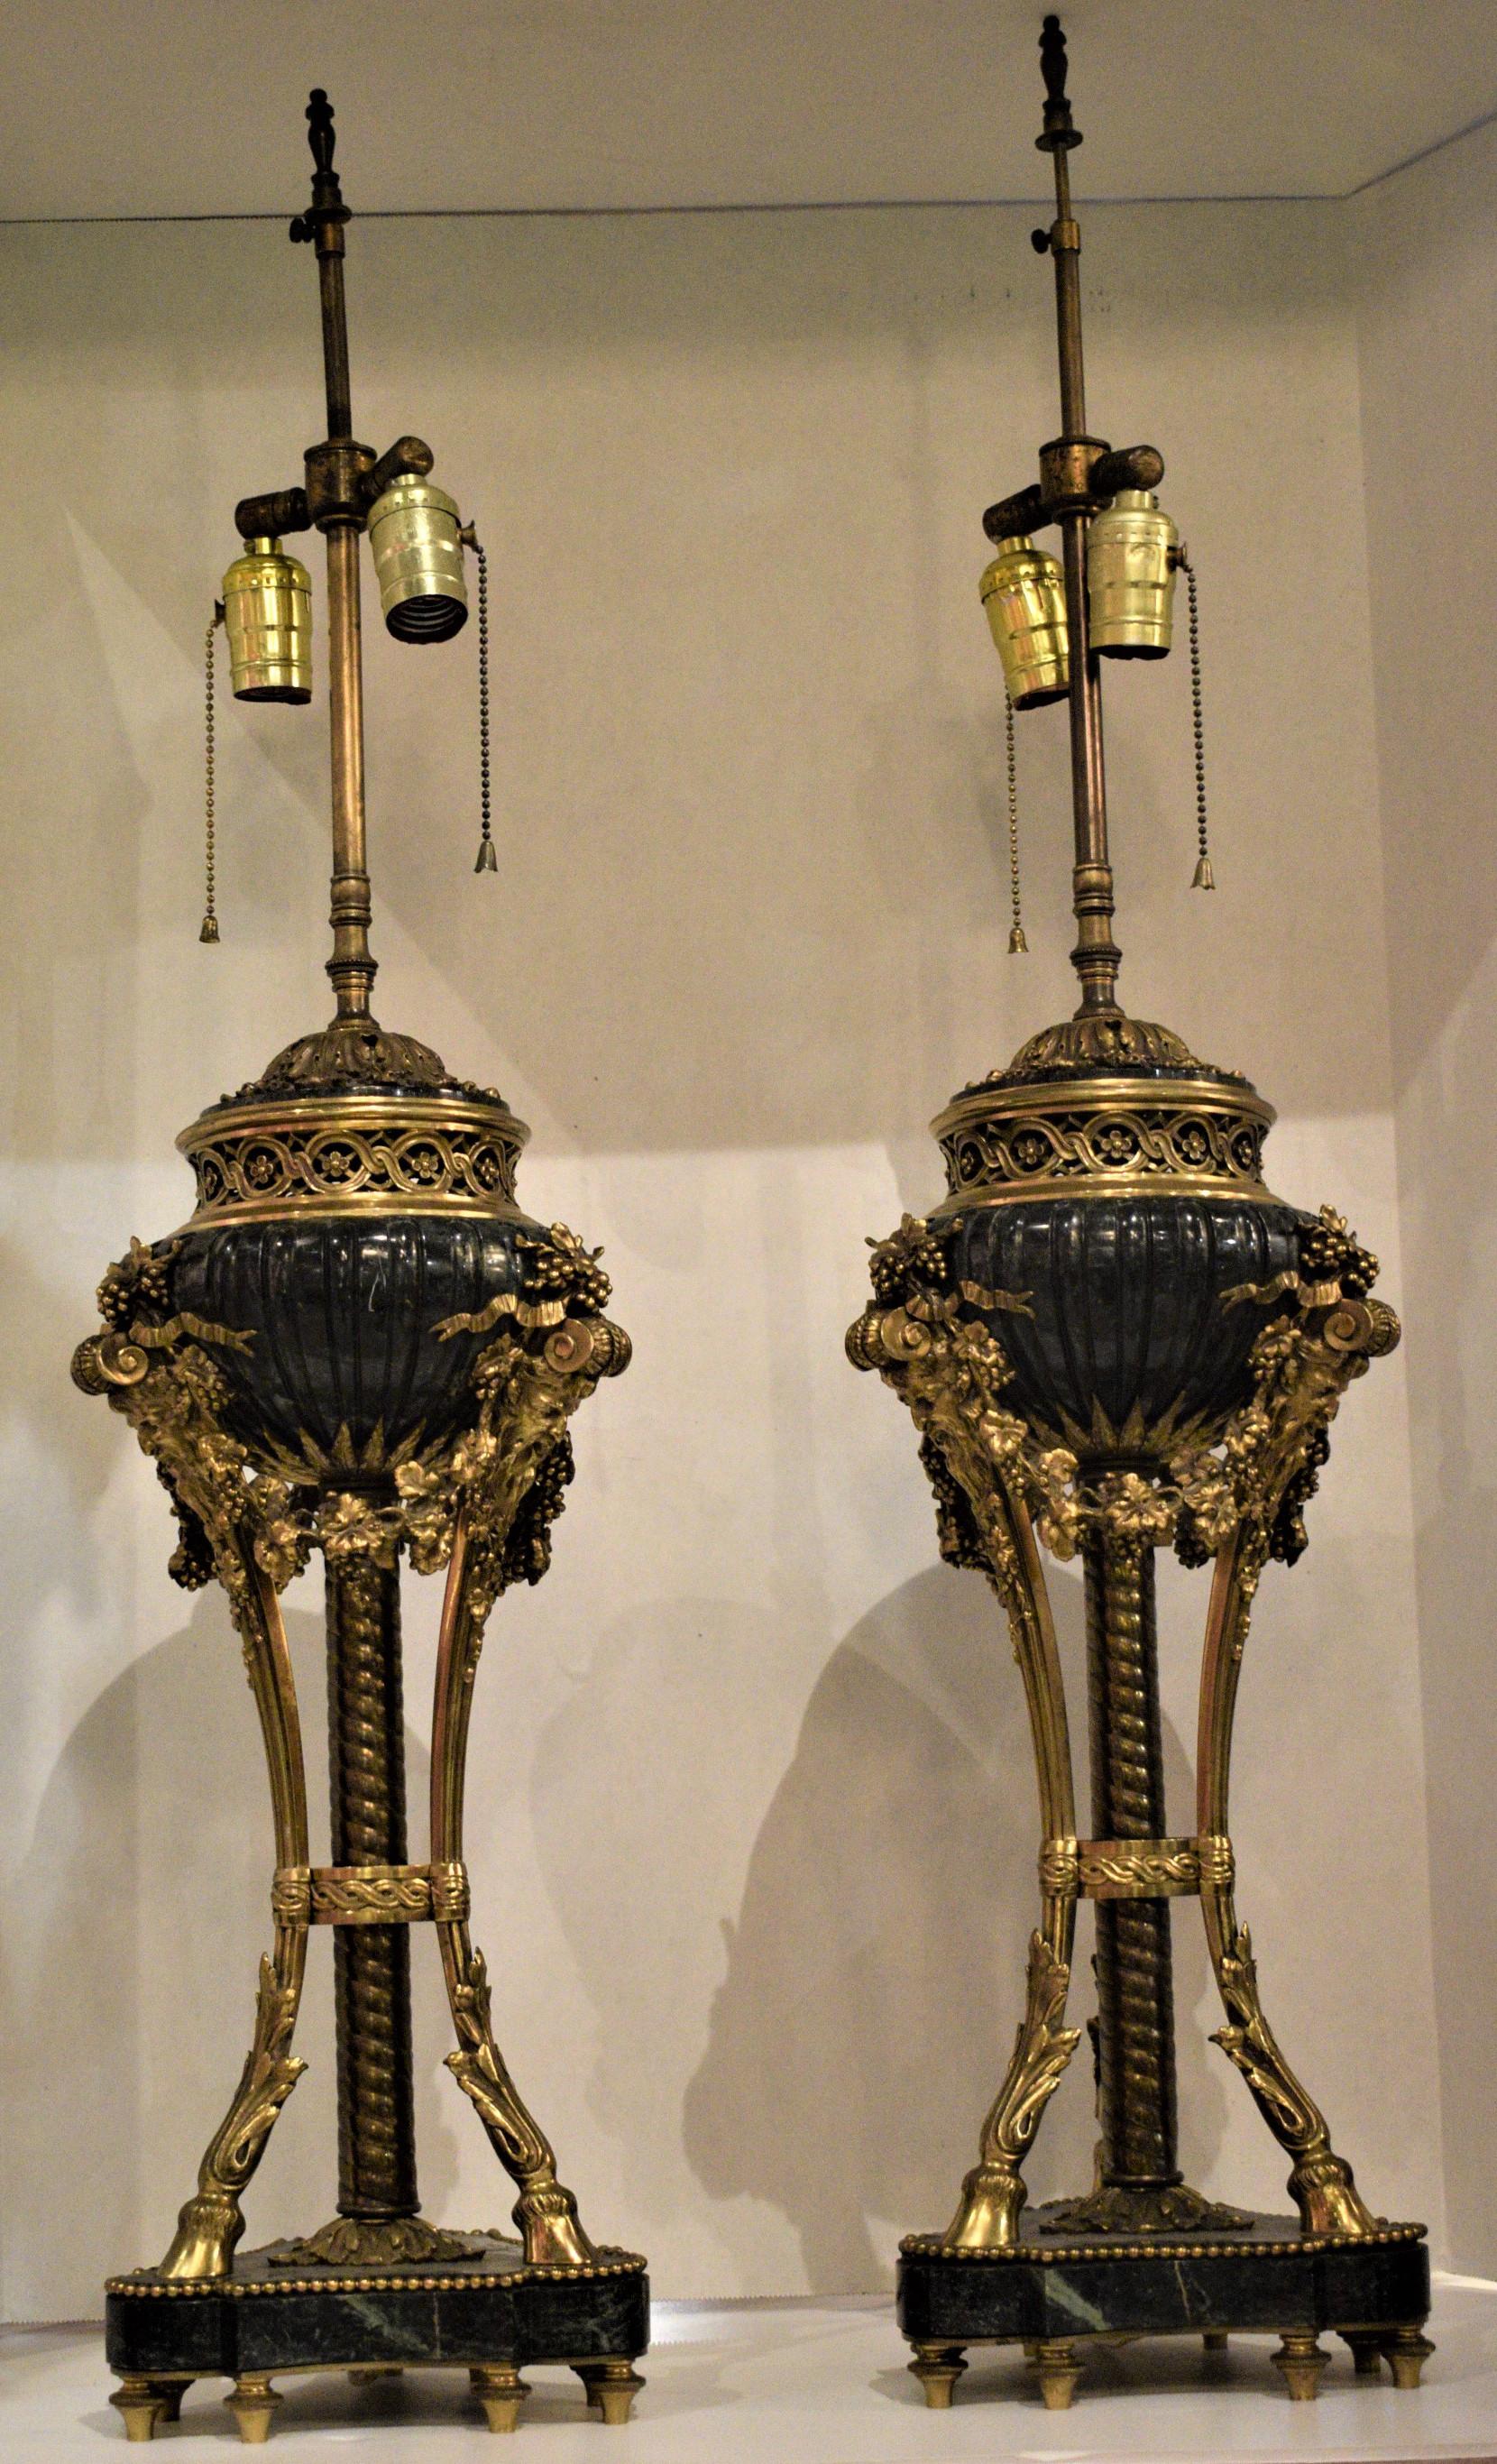 Exquisite pair of gilt bronze and marble lamps depicting Bacchus masks, garlands with grapes and leaves supported by three feet ending on hooves, on the bottom a marble plinth raised on turned toupie feet. On top a pierced gallery. These were